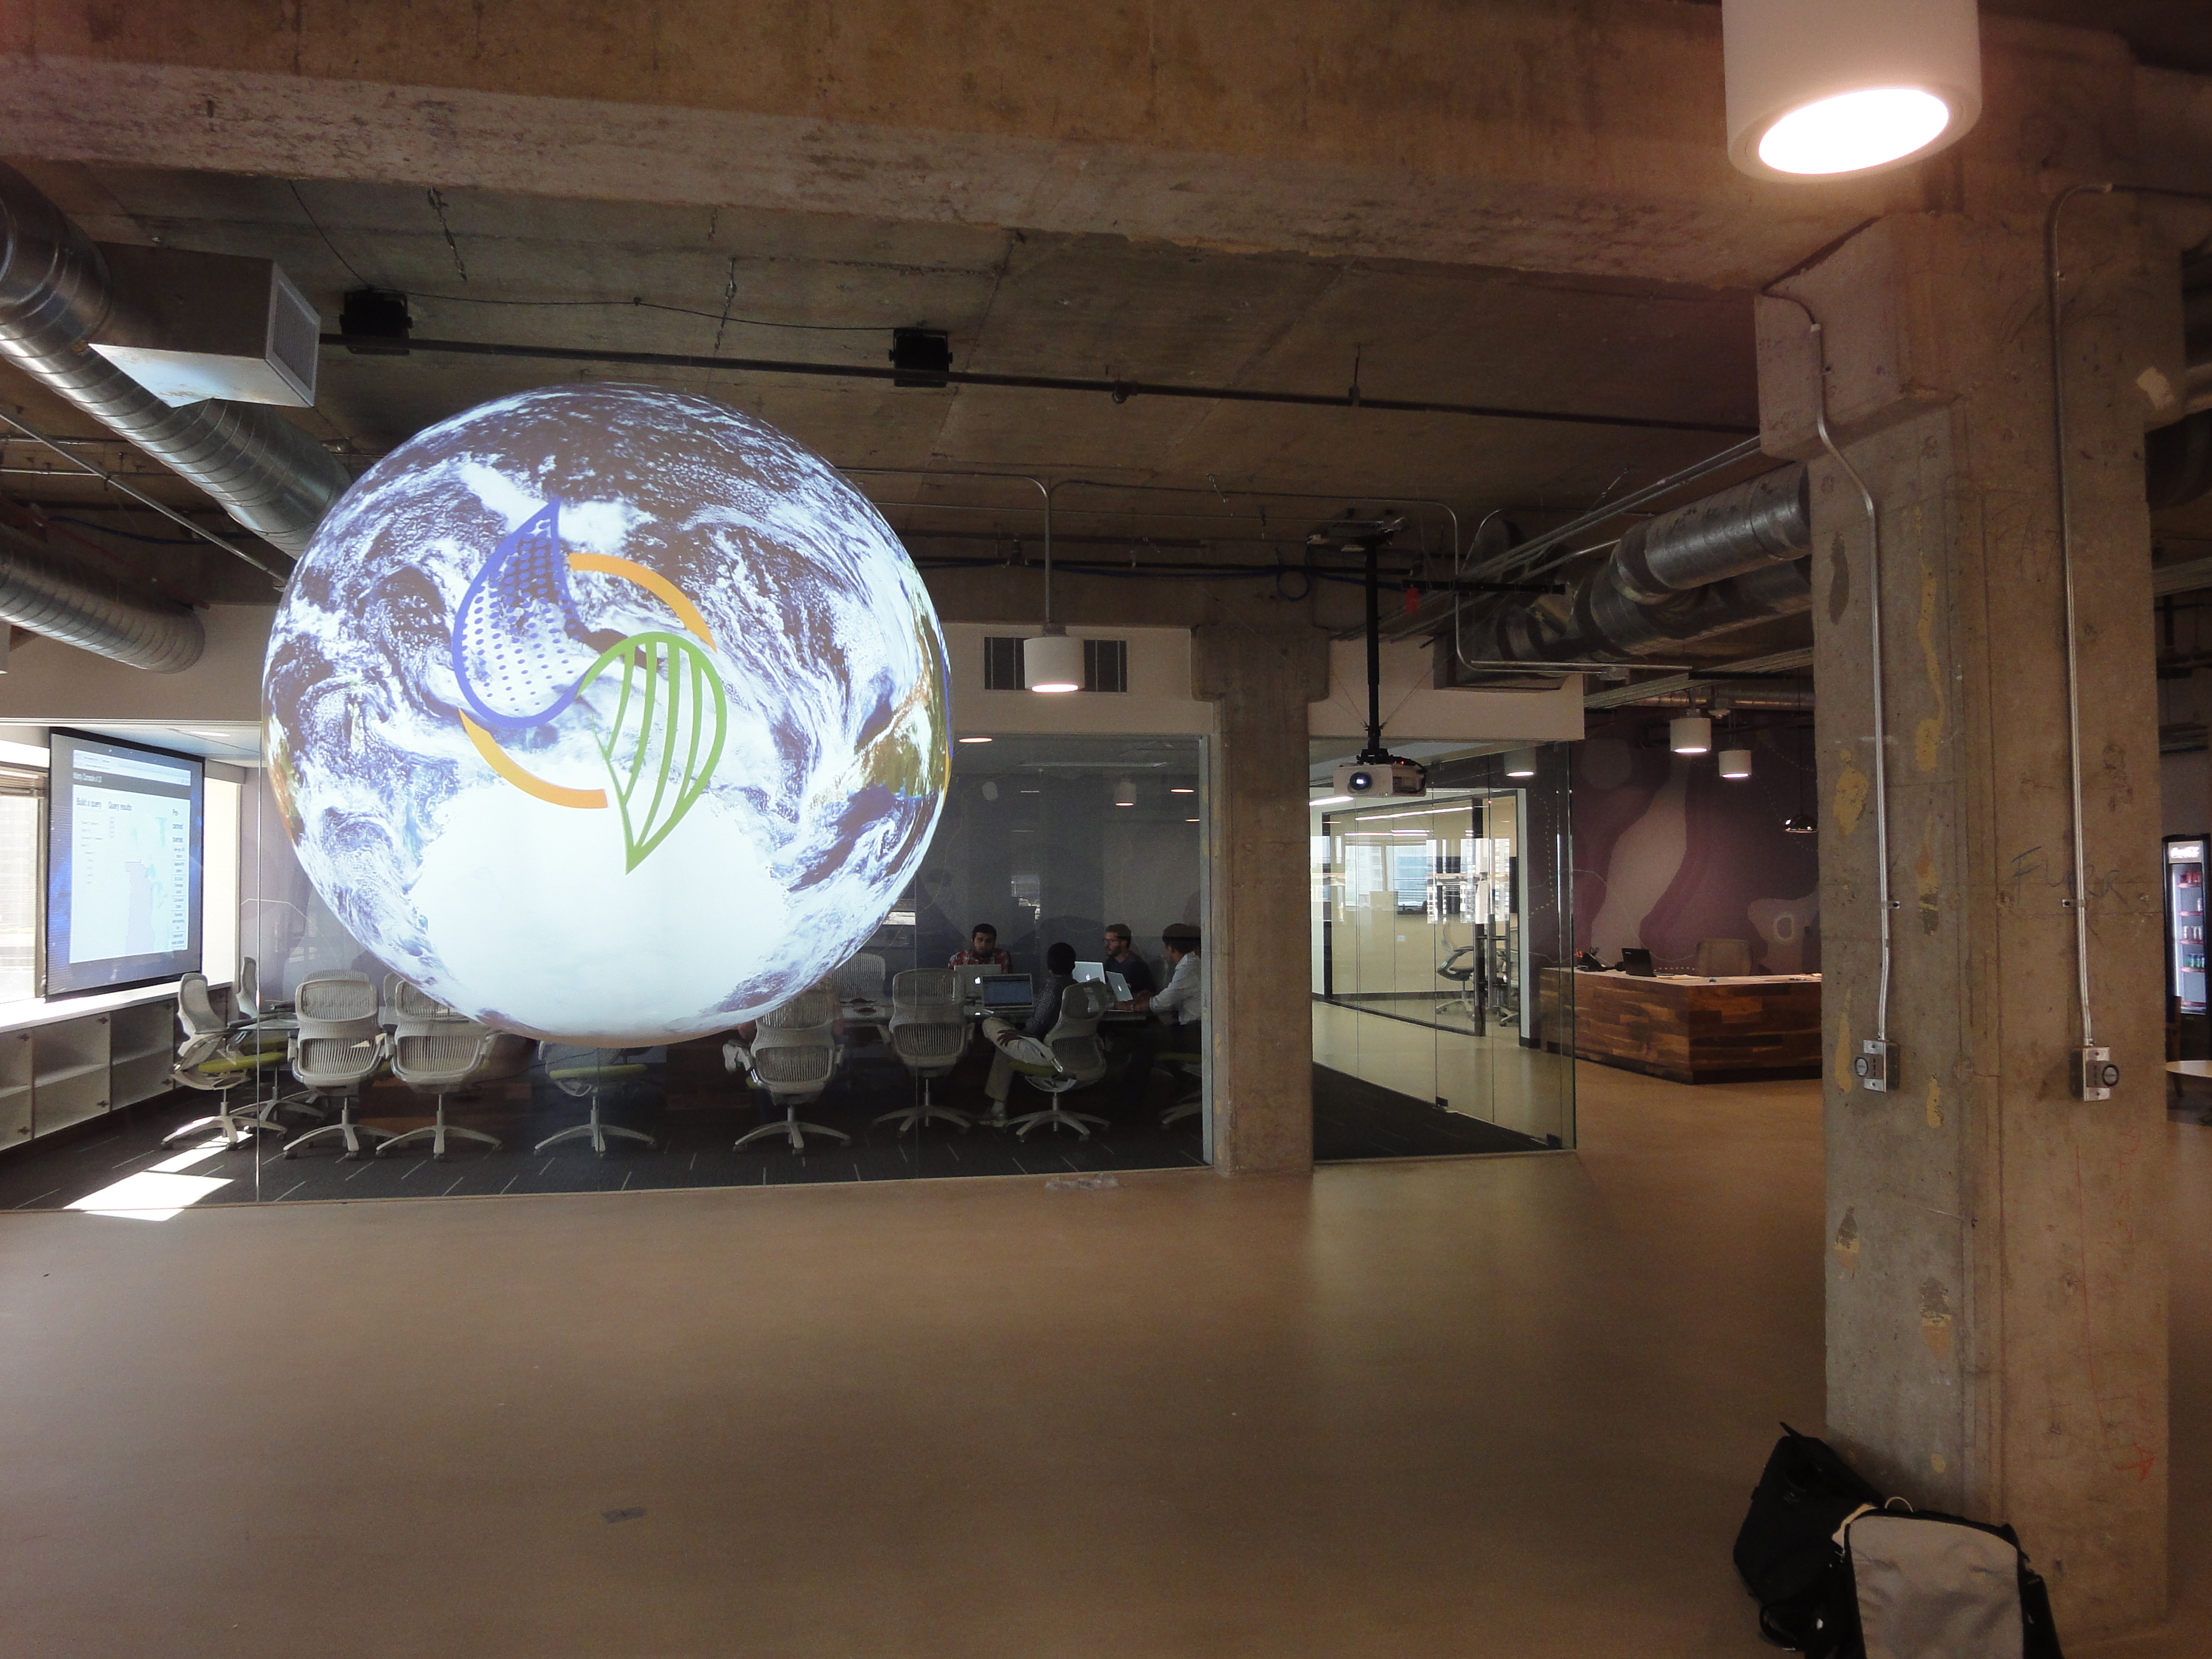 Science On a Sphere displays the Climate Corp logo over a satellite image of Earth in concrete lobby. In the background some people sit around a large conference table in a room with glass walls